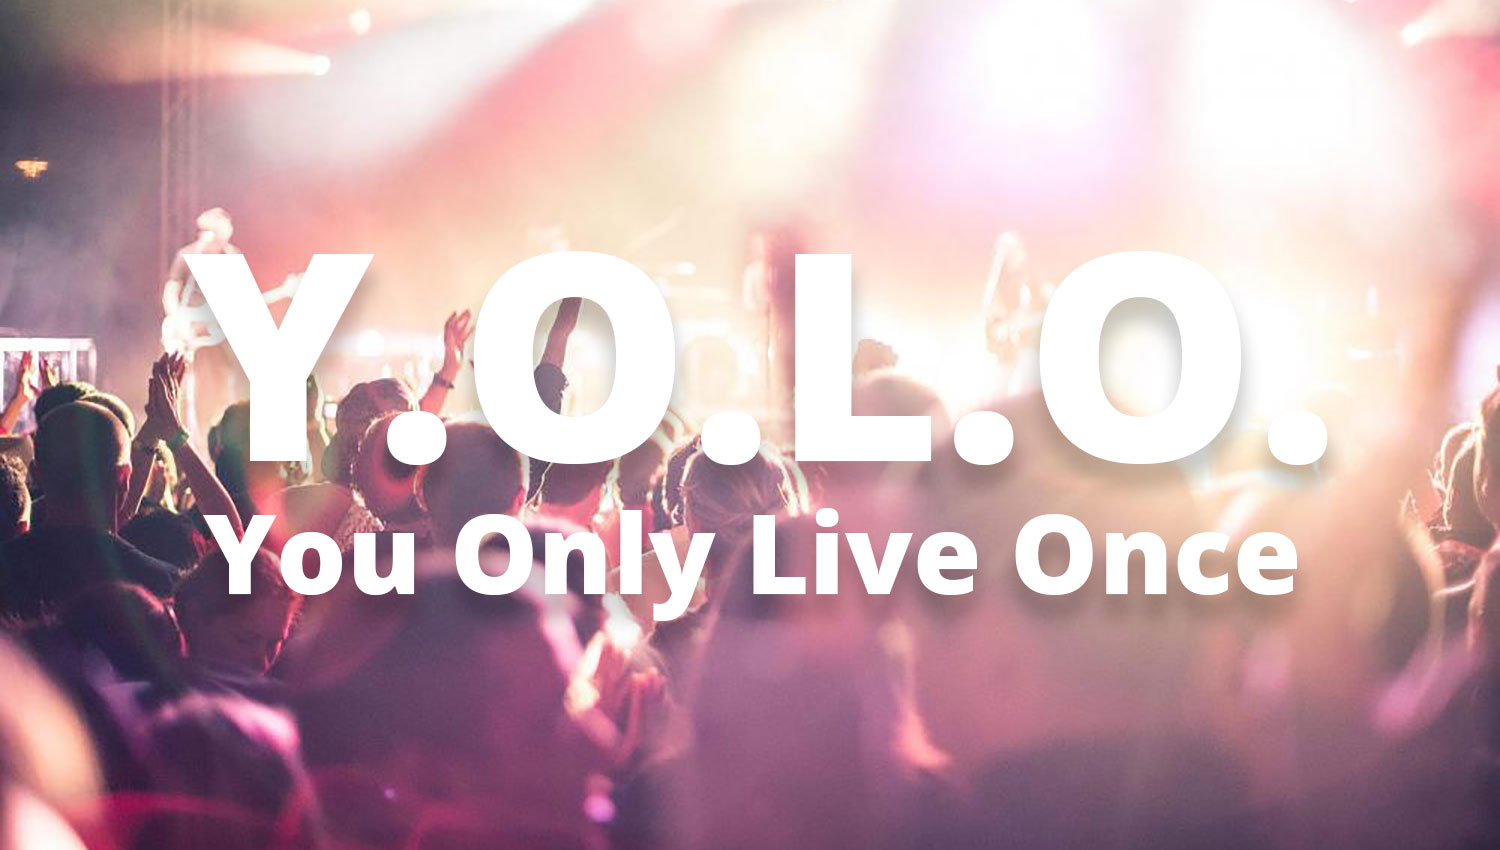 Yolo: you only Live once выставка. VR-инсталляция Yolo: you only Live once. Yolo you only Live once иллюстрация. Yolo экономика. Do once best